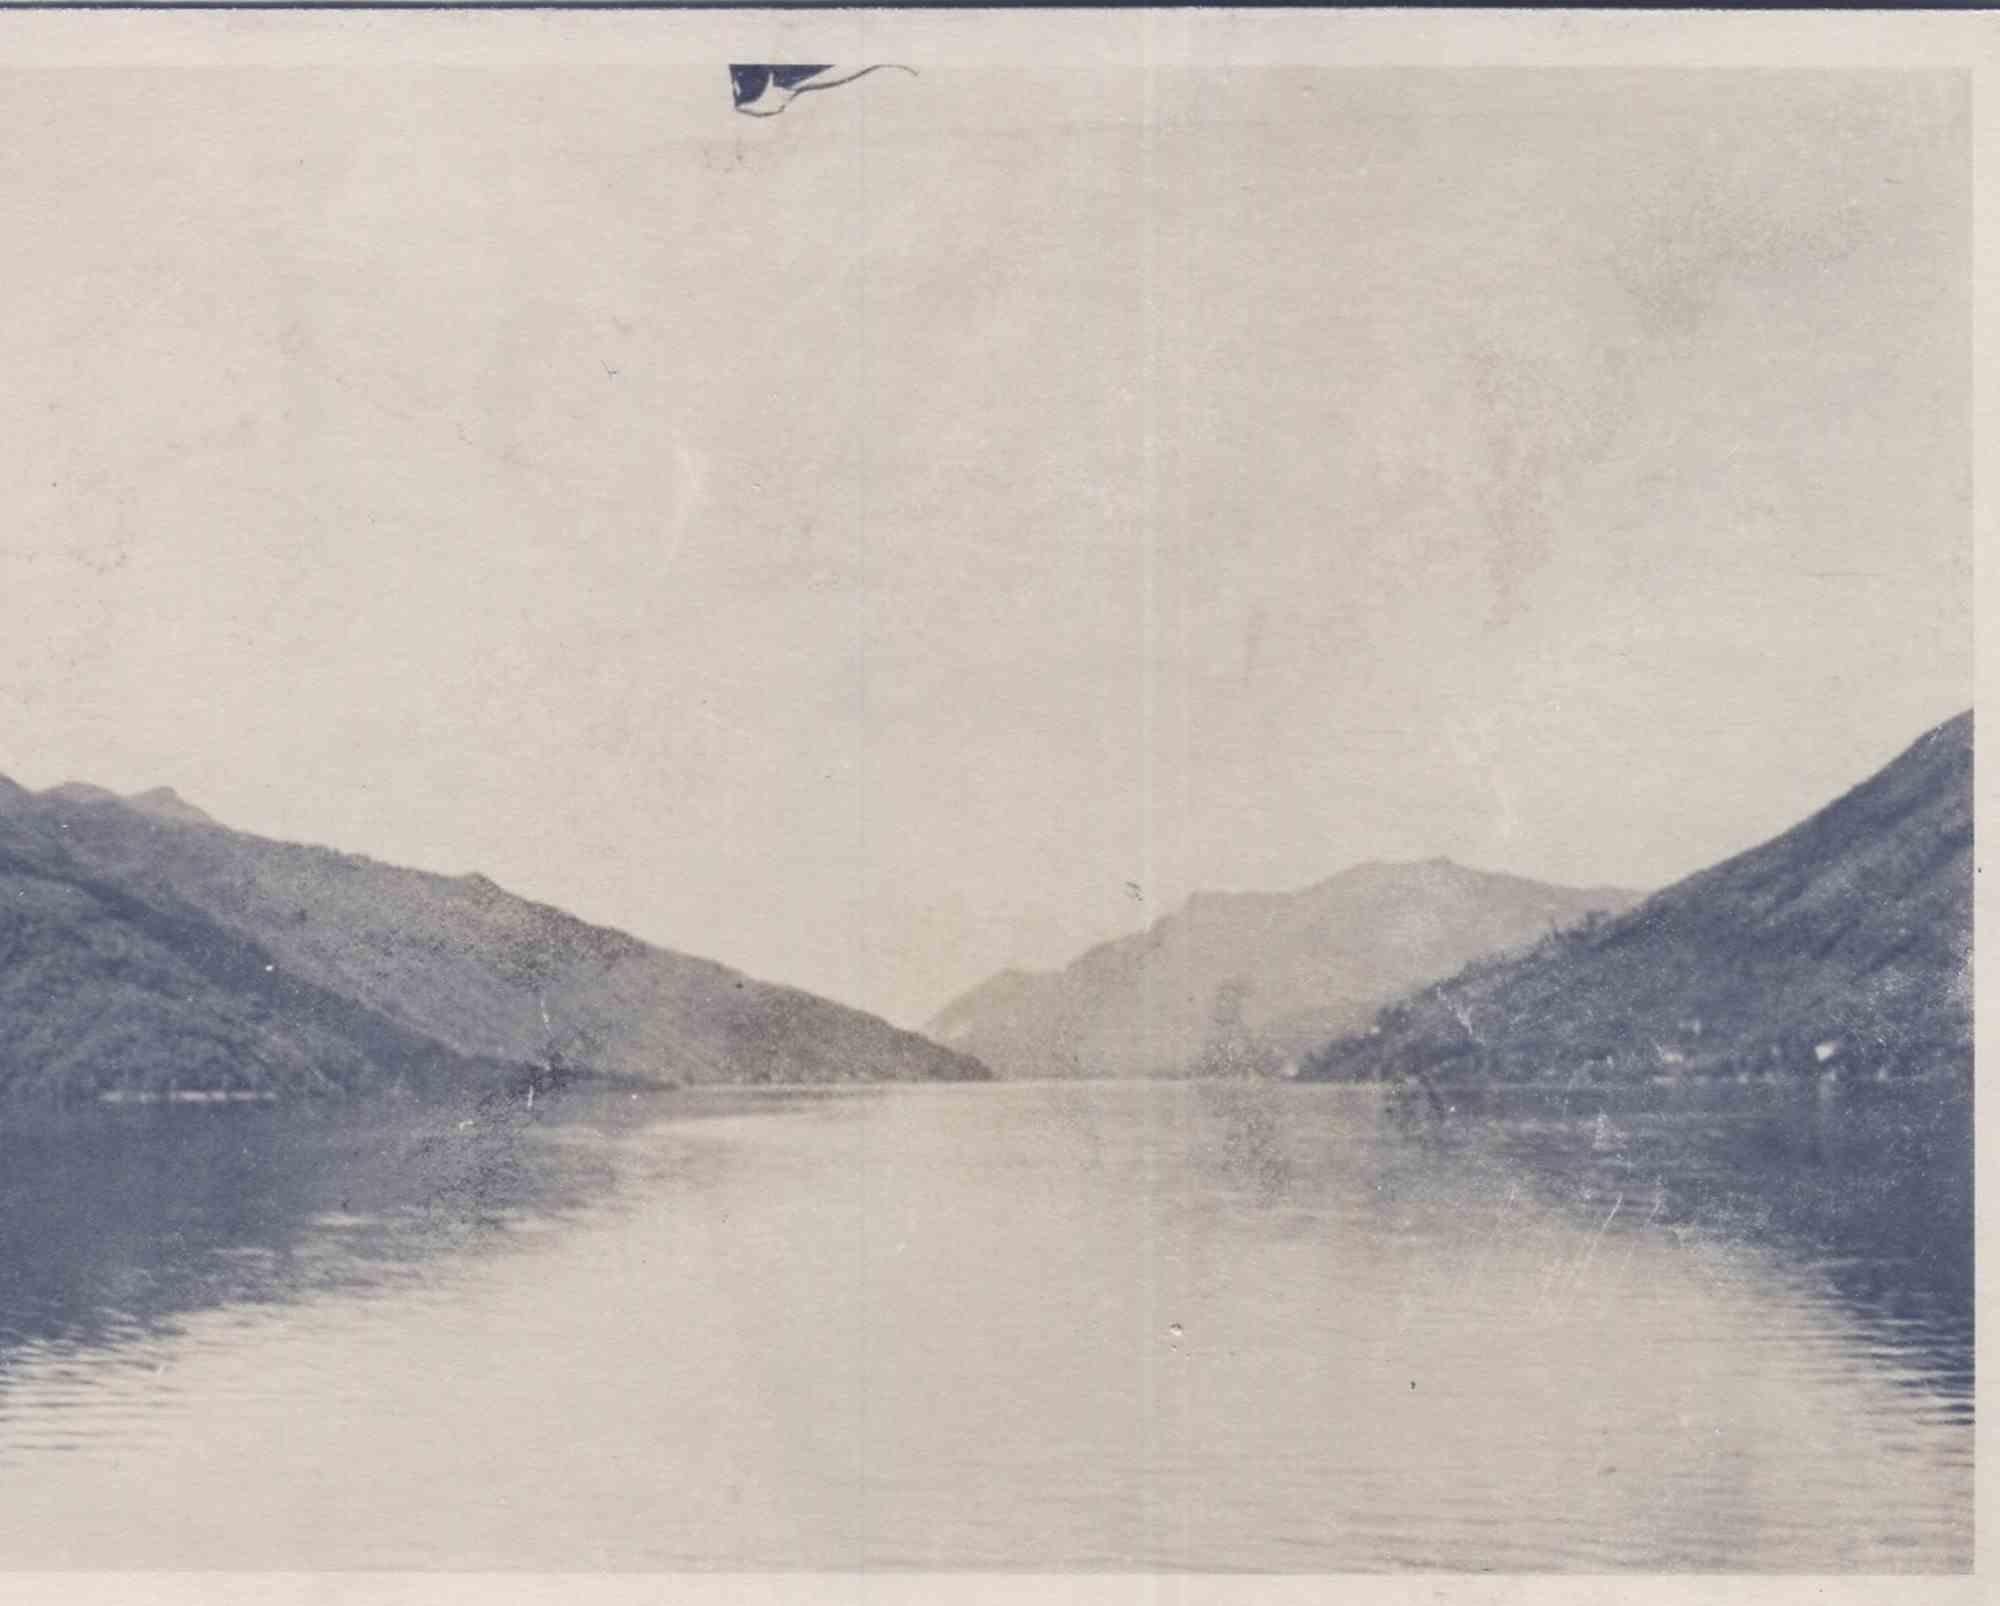 Unknown Figurative Photograph - Old days Photo - Mountain and Lake - Vintage Photo - Mid-20th Century